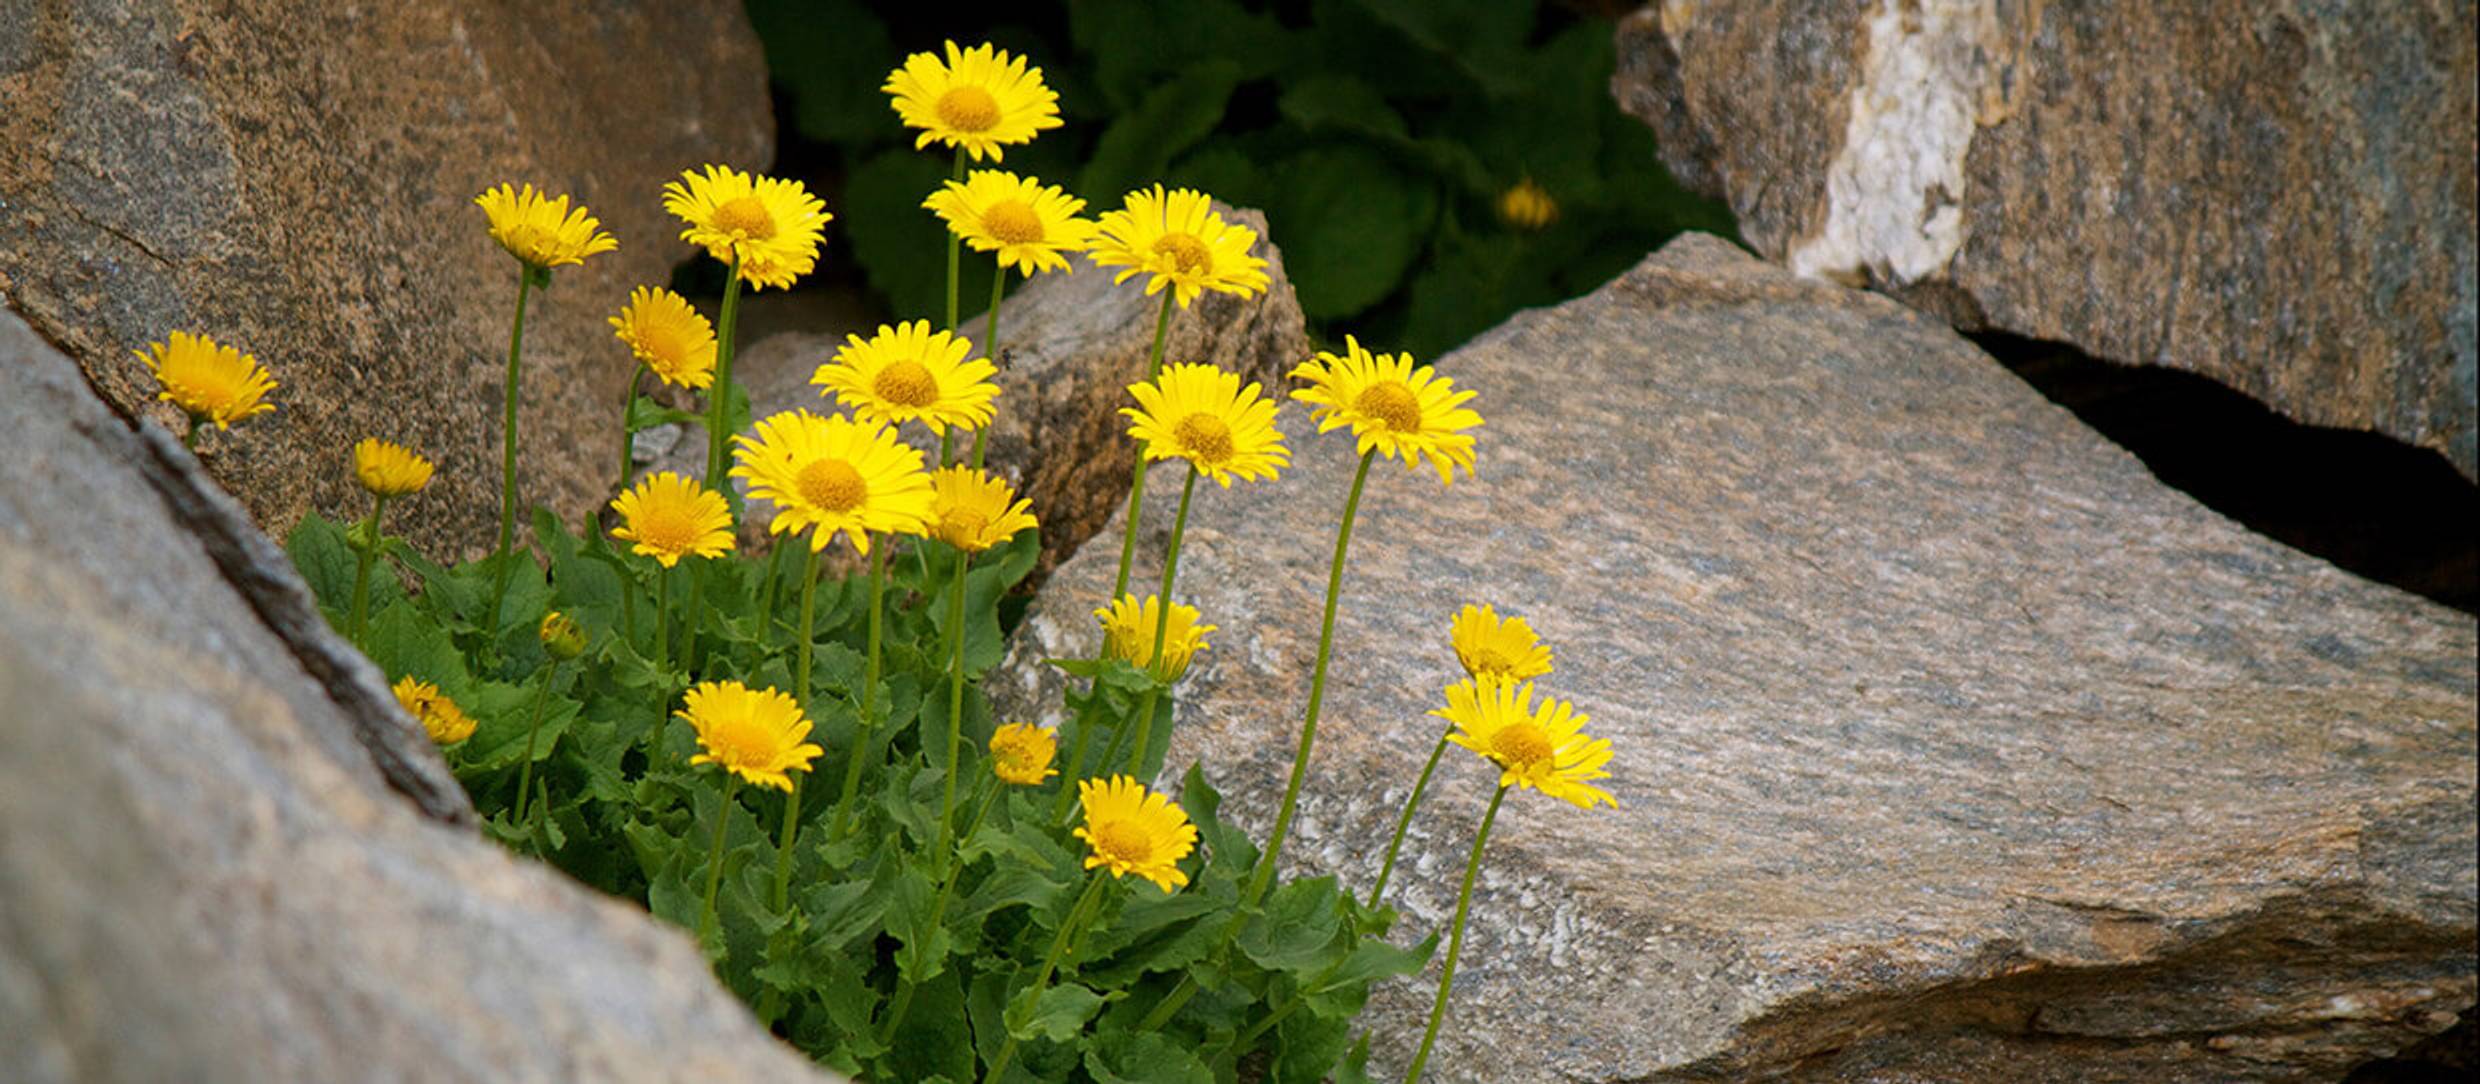 The amazing Benefits of Arnica Oil as a pain reliever